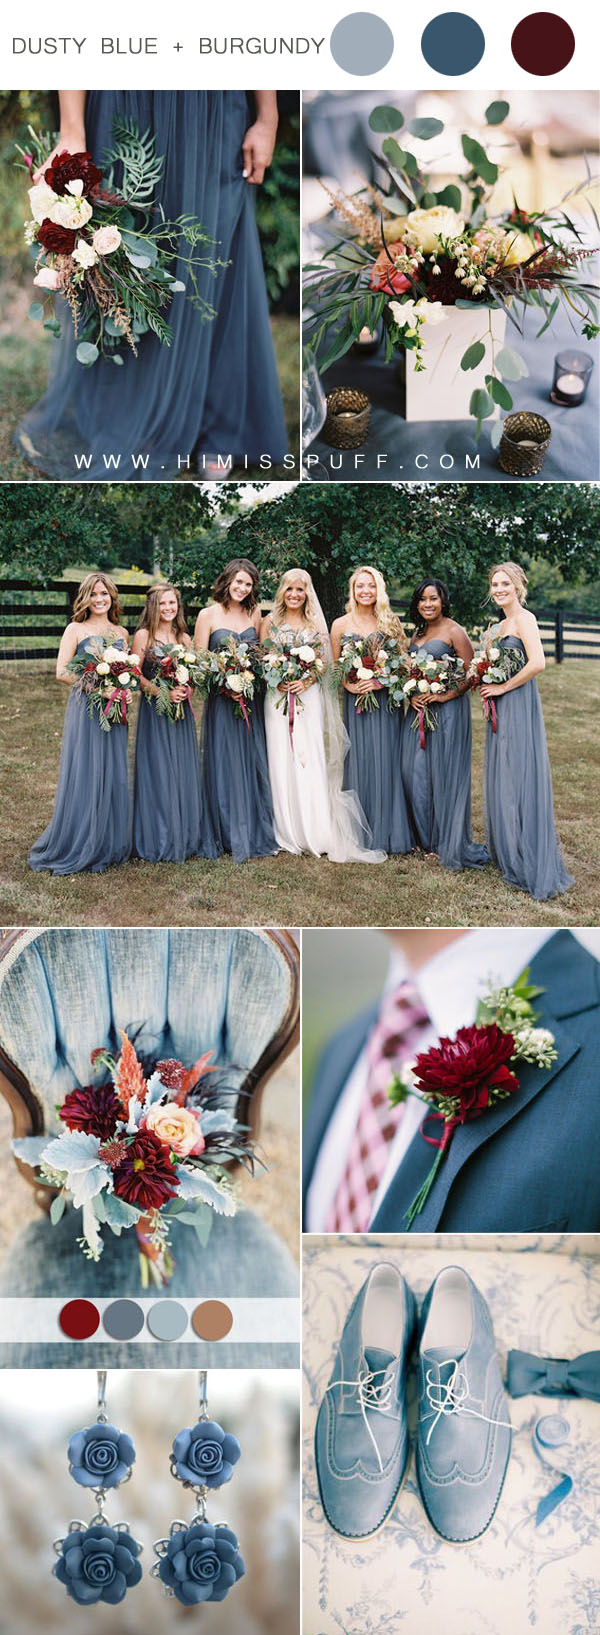 dusty blue and burgundy Wedding Color Combo Ideas